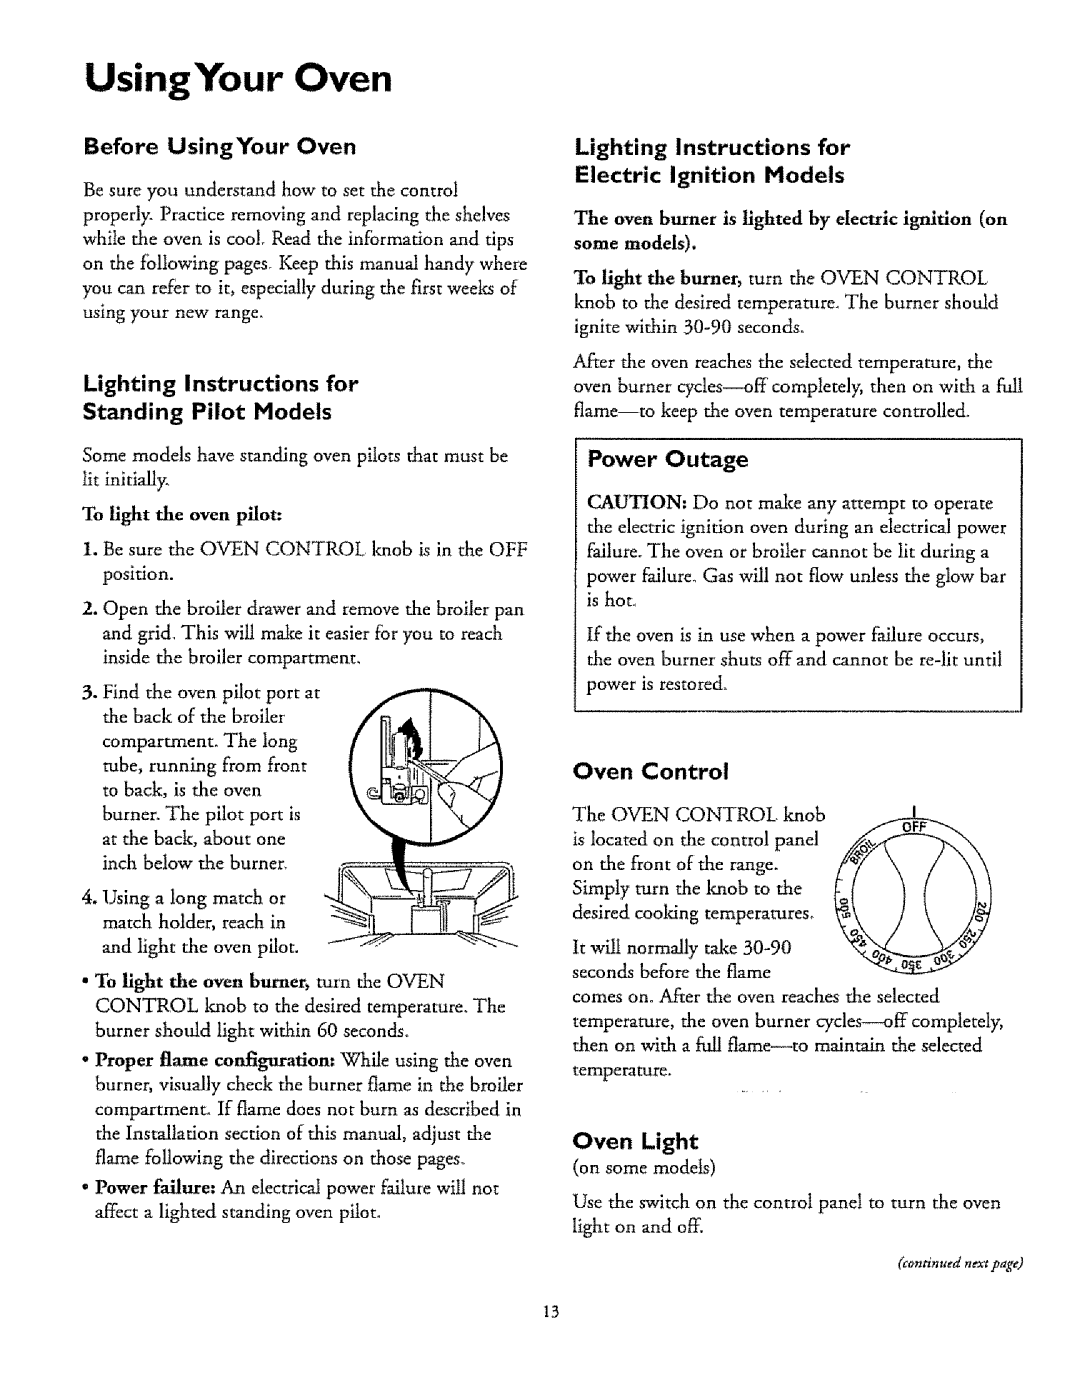 Sears 61111, 71751 UsingYour Oven, Lighting Instructions for Standing Pilot Models, Electric Ignition Models, Oven Control 